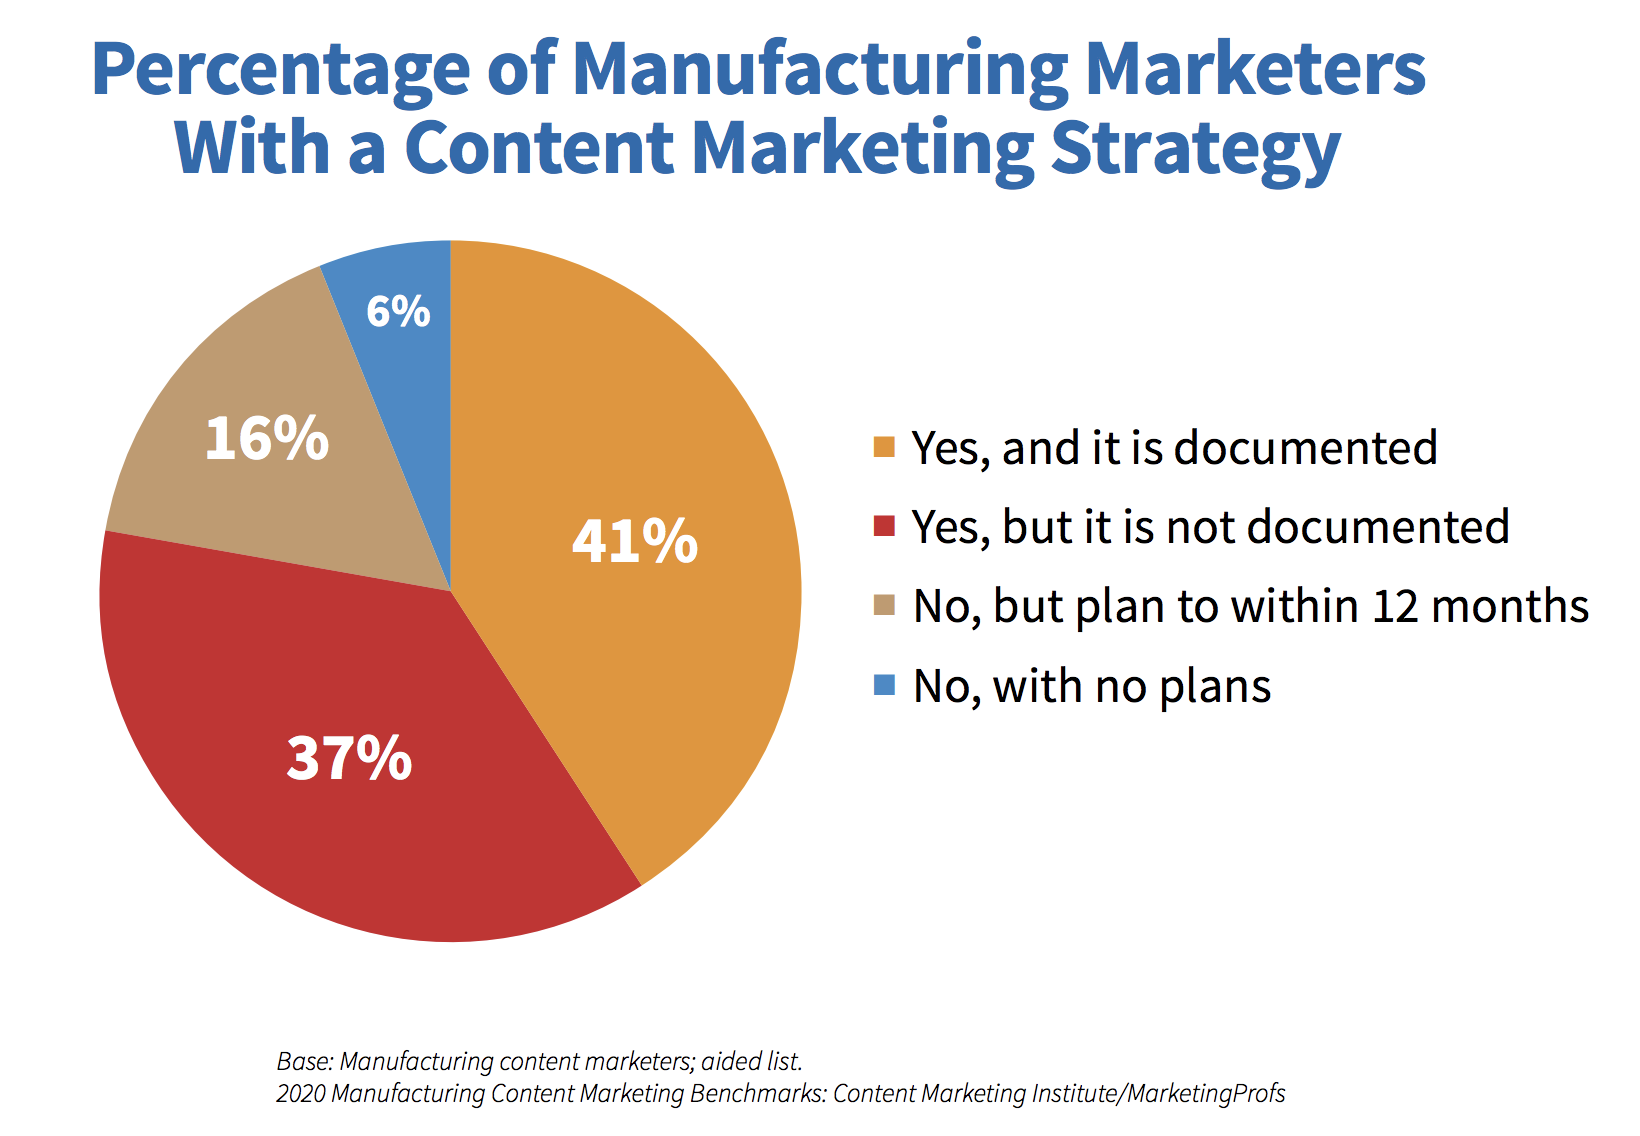 Percent of Manufacters with Content Marketing Strategy